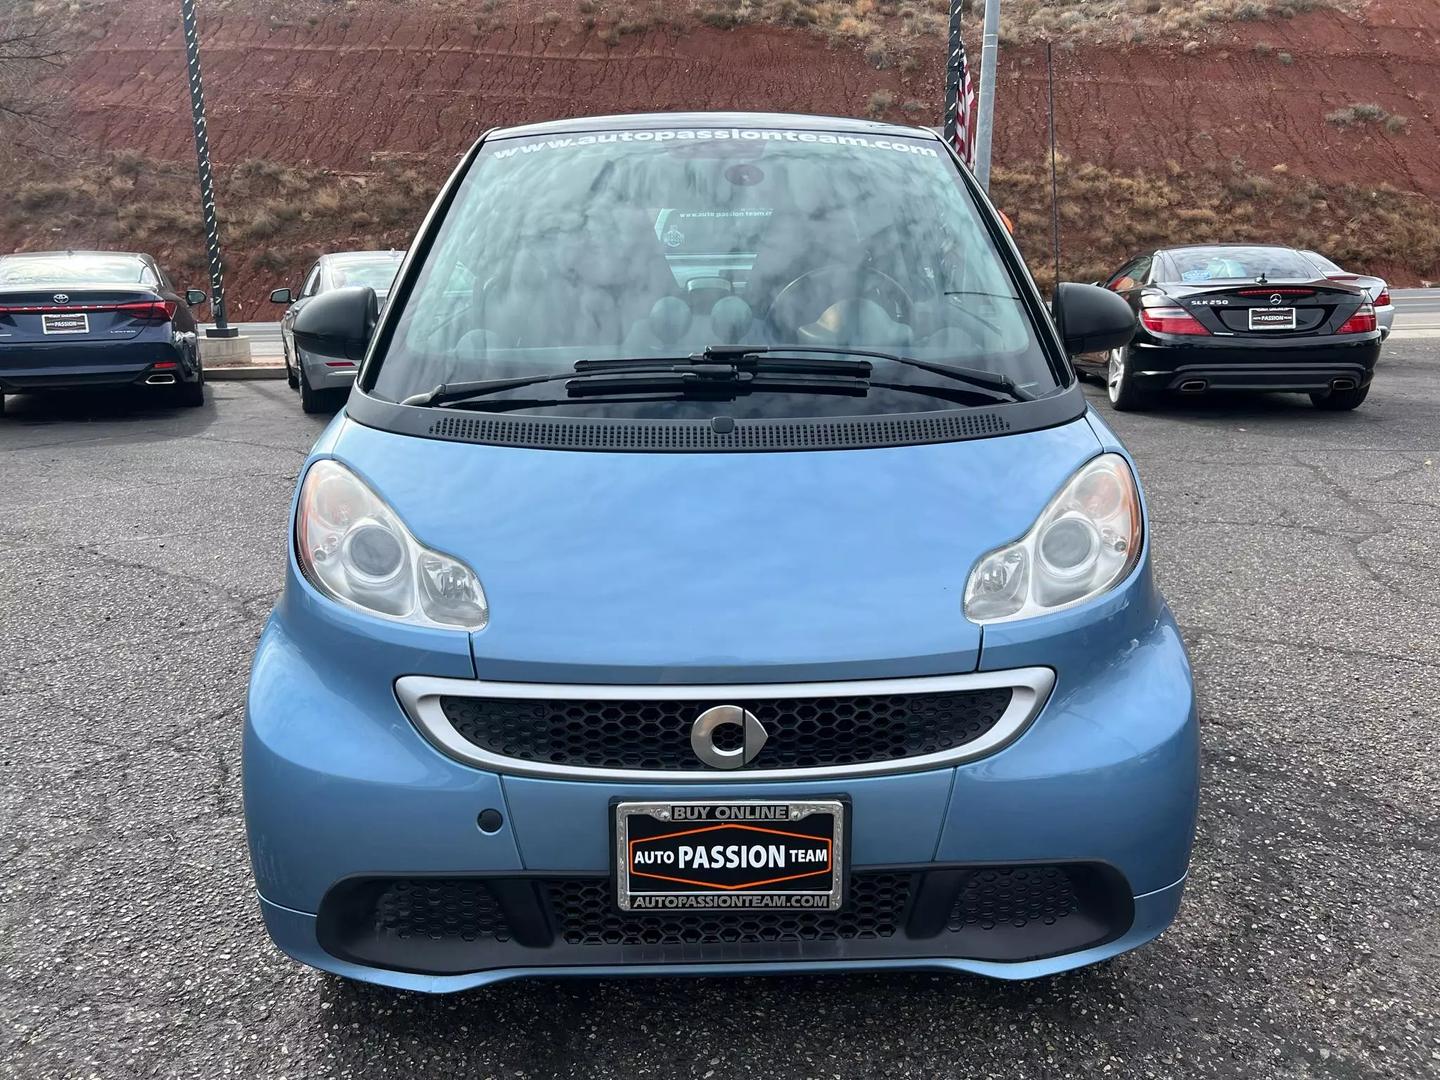 Used 2014 smart fortwo Electric Drive with VIN WMEEJ9AA4EK736967 for sale in St. George, UT